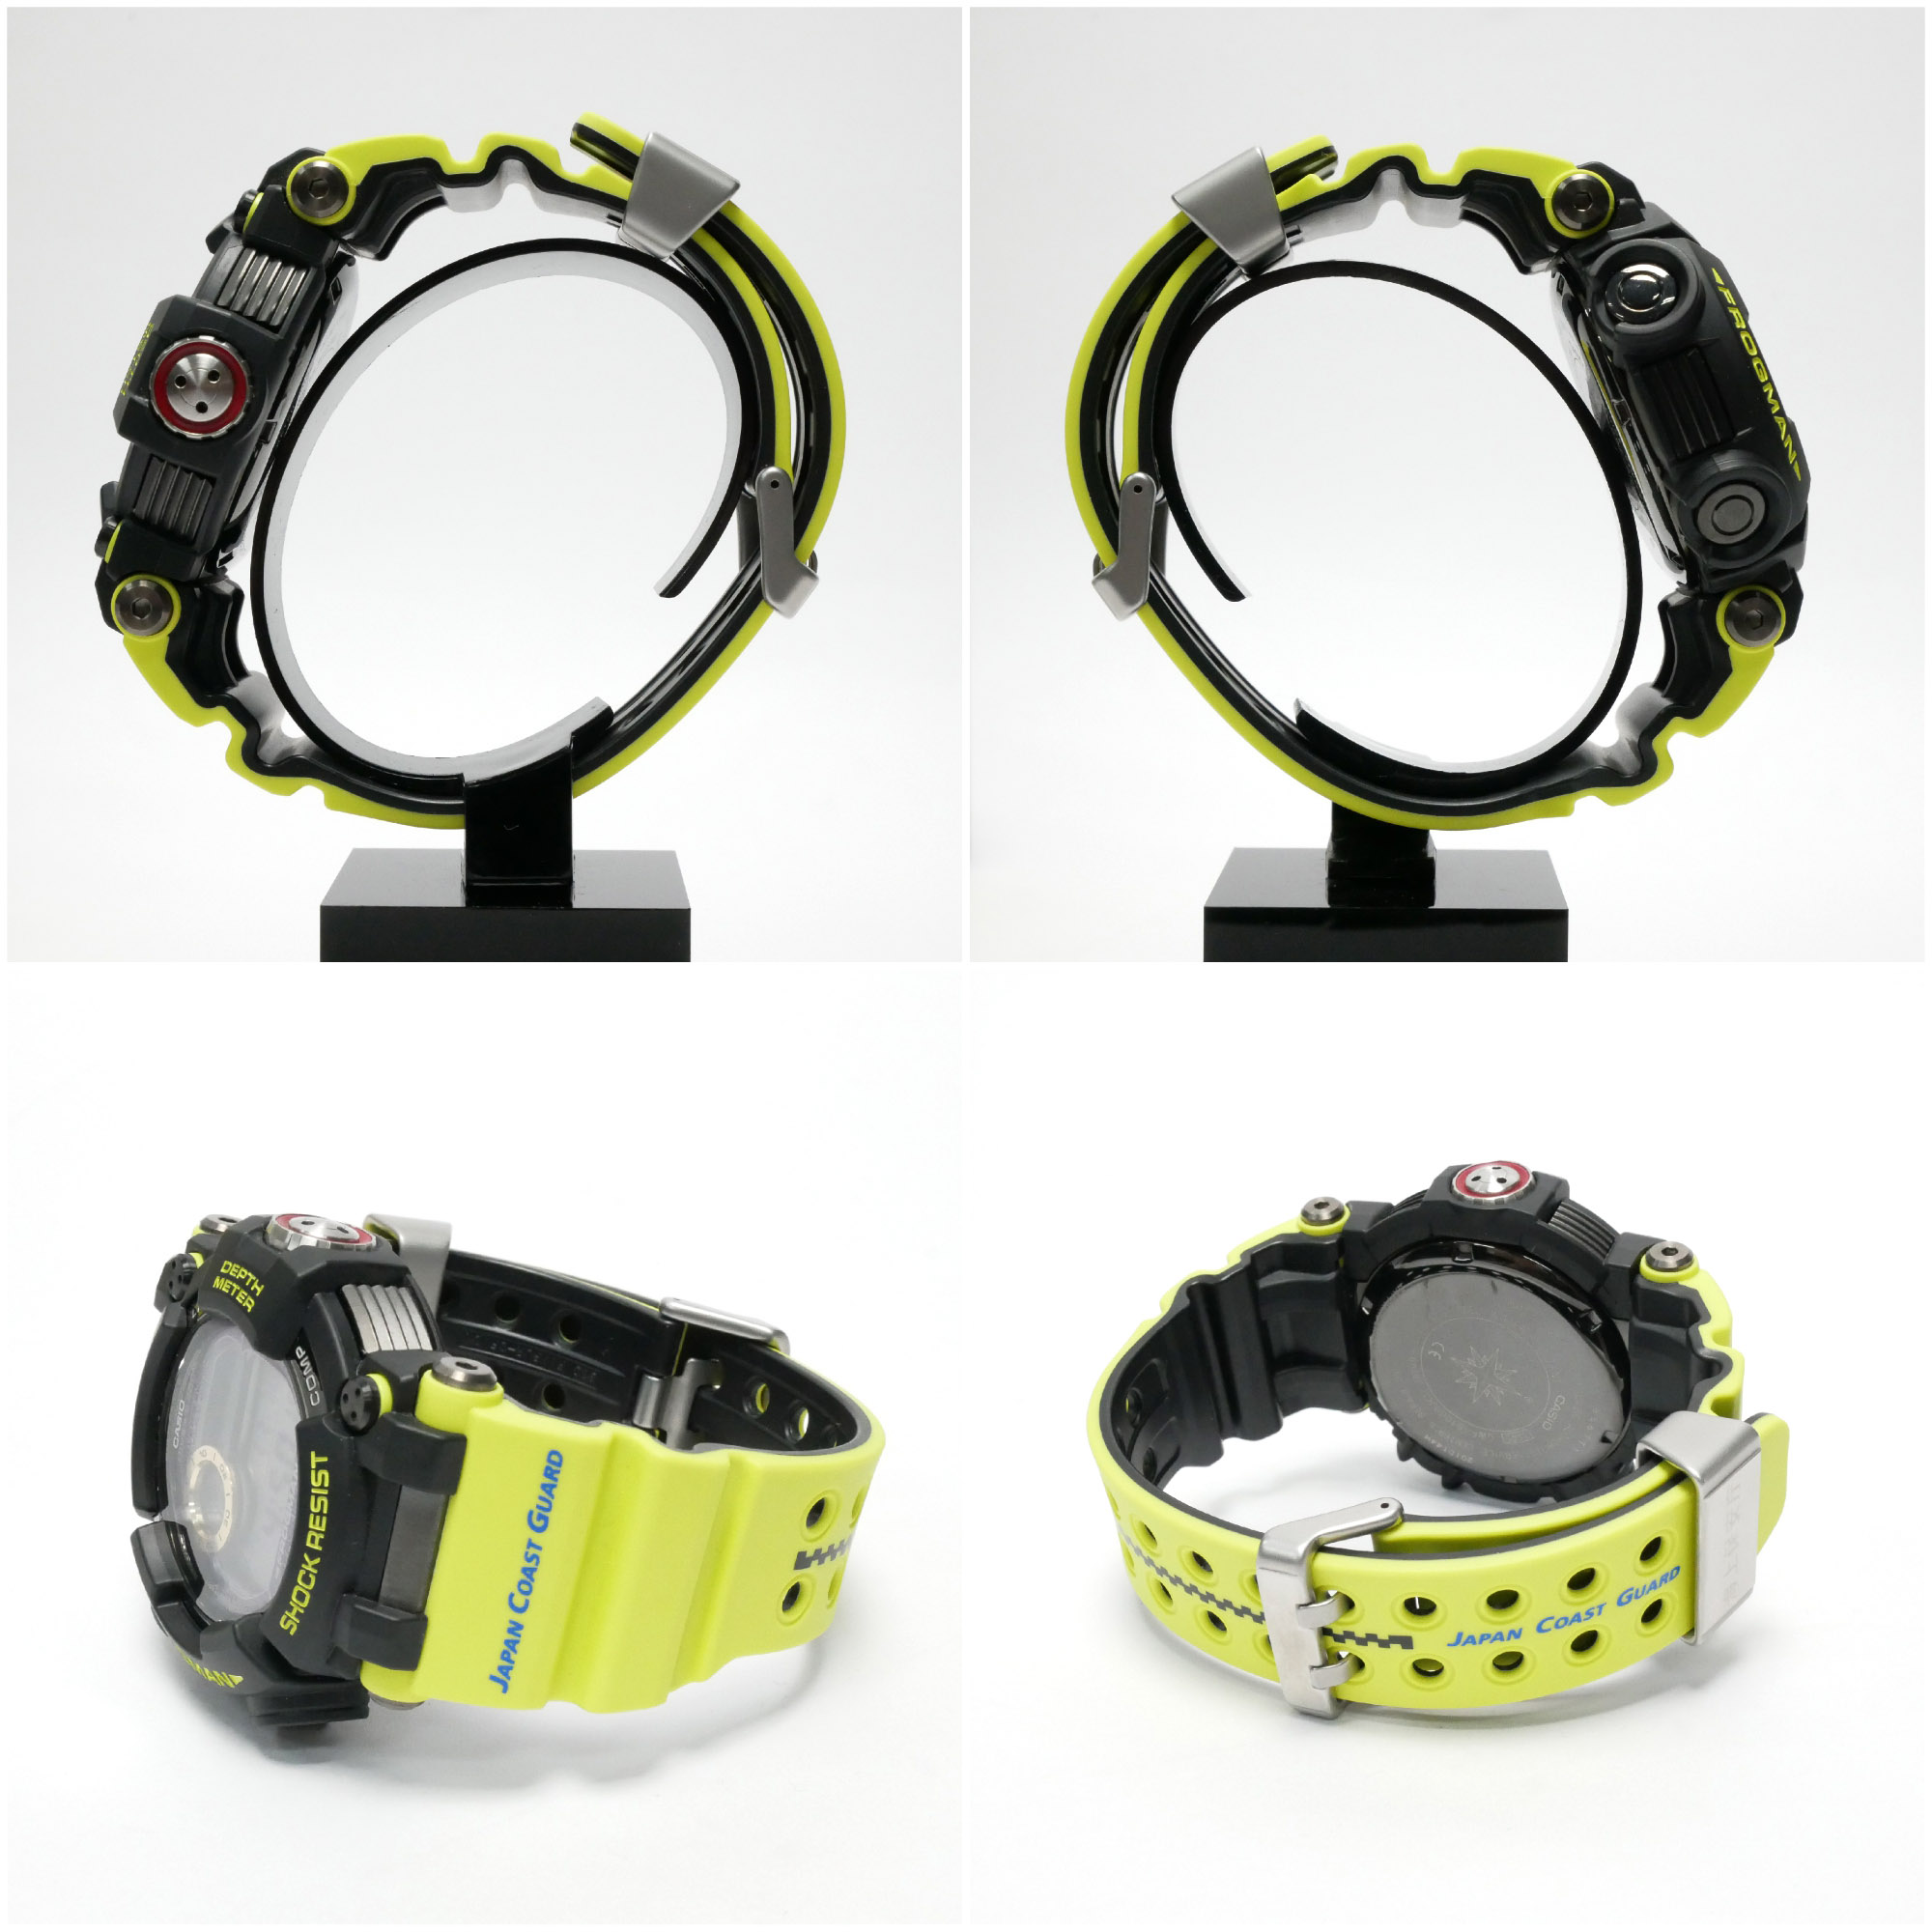 Used] [Almost New] G-SHOCK CASIO Casio FROGMAN Frogman Coast Guard  Collaboration Divers Watch Wristwatch Men's Radio Solar Impact Resistant  Structure ISO200m Diving Waterproof Multifunctional Stainless Steel/Rubber  Black/Neon Yellow GWF-D1000JCG-9JR ...